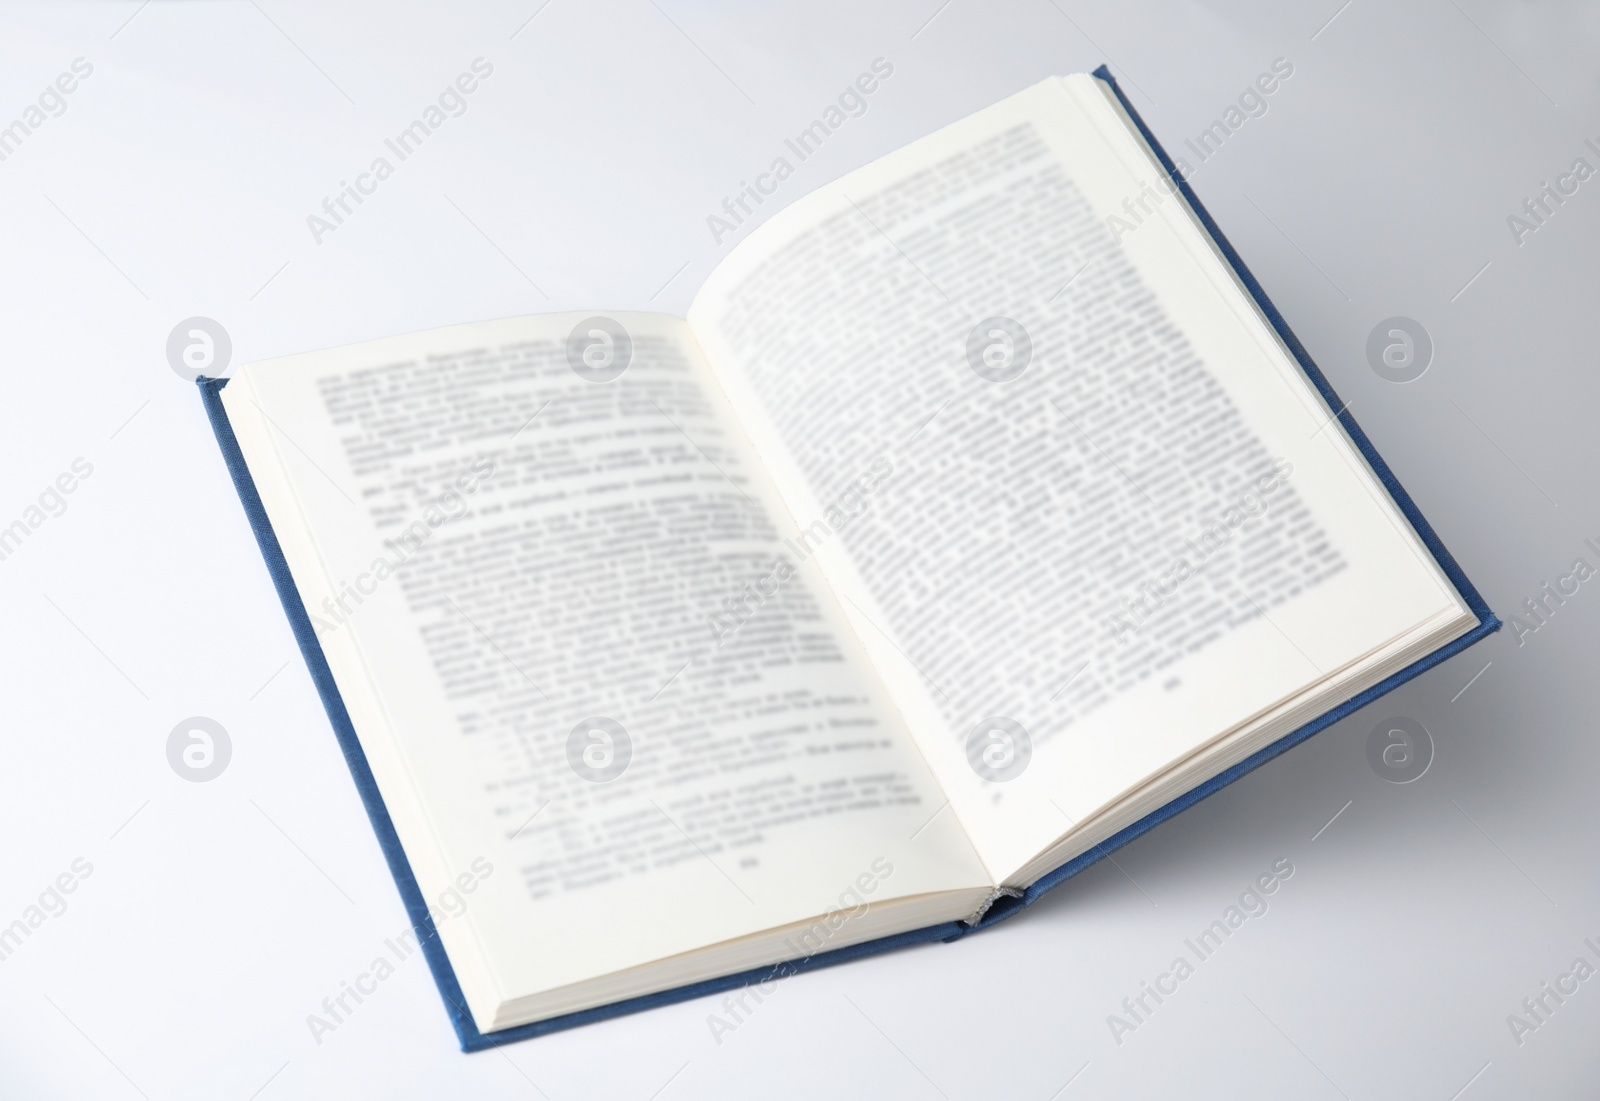 Photo of Open book with hardcover on white background